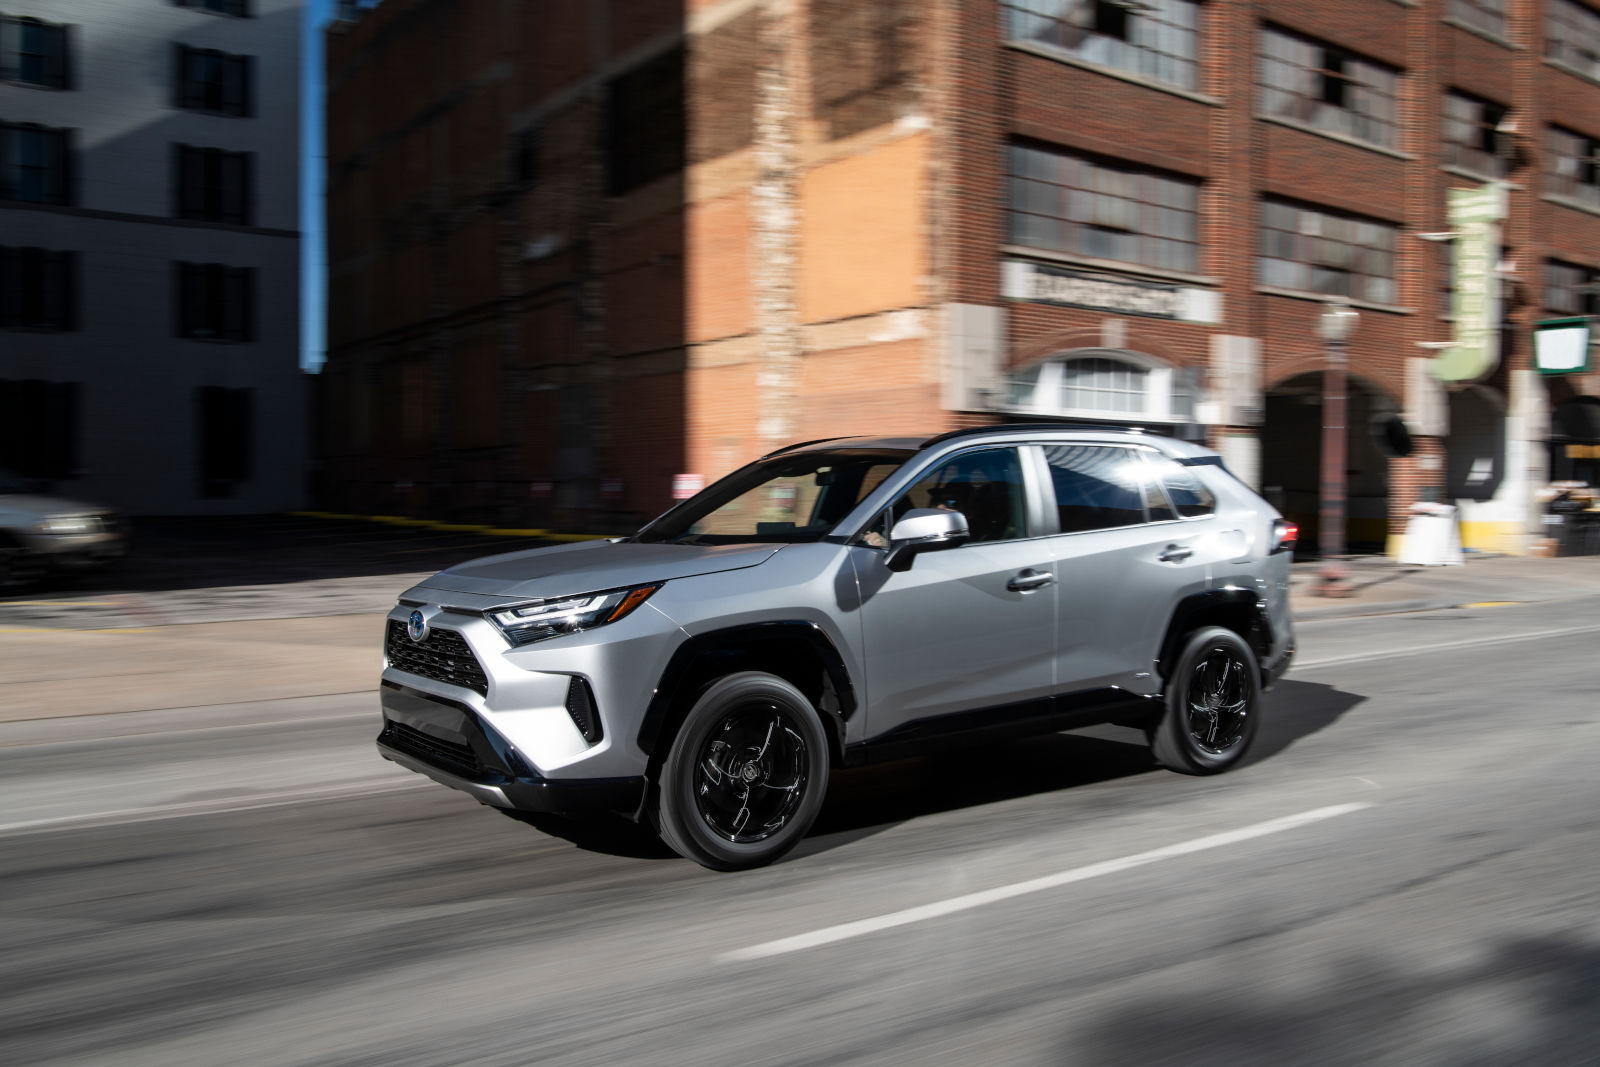 Pre-Owned Toyota RAV4 vs. Used Kia Sportage – A Comparison of Key Features